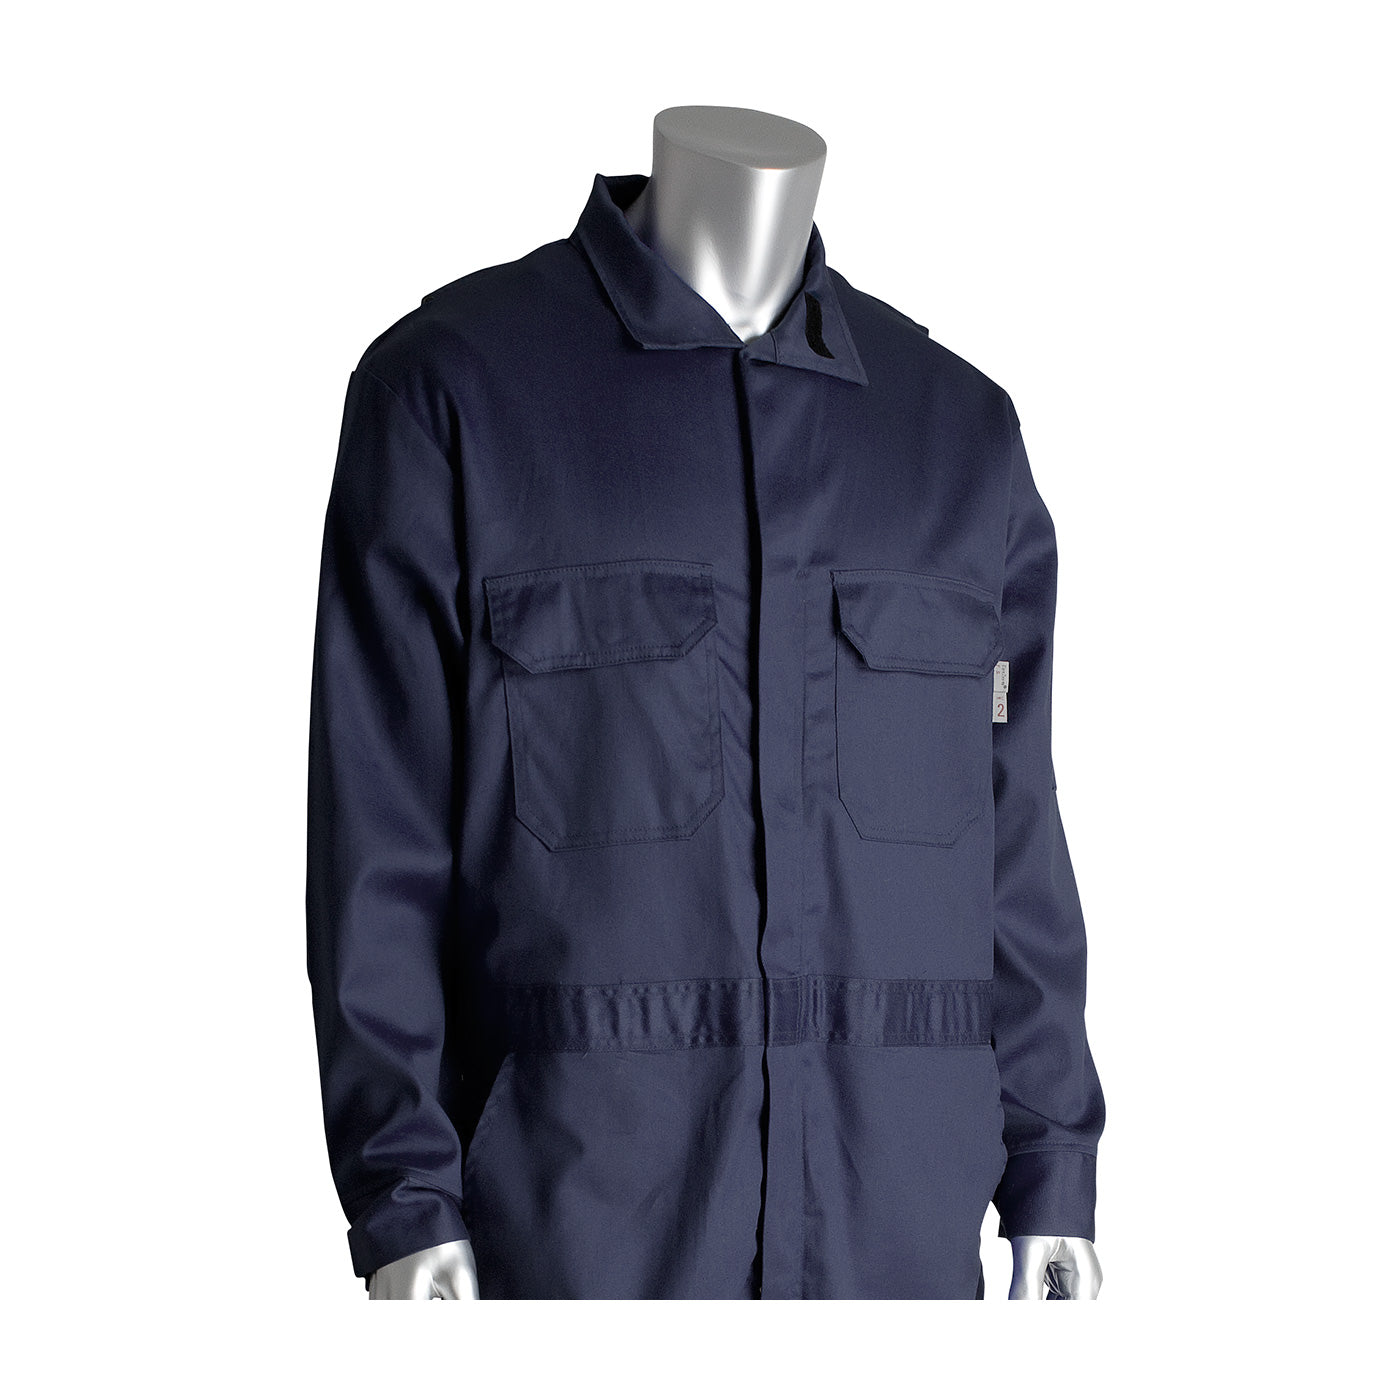 PIP 385-FRSC-KH/2X AR/FR Dual Certified Coverall with Zipper Closure - 9.2 Cal/cm2